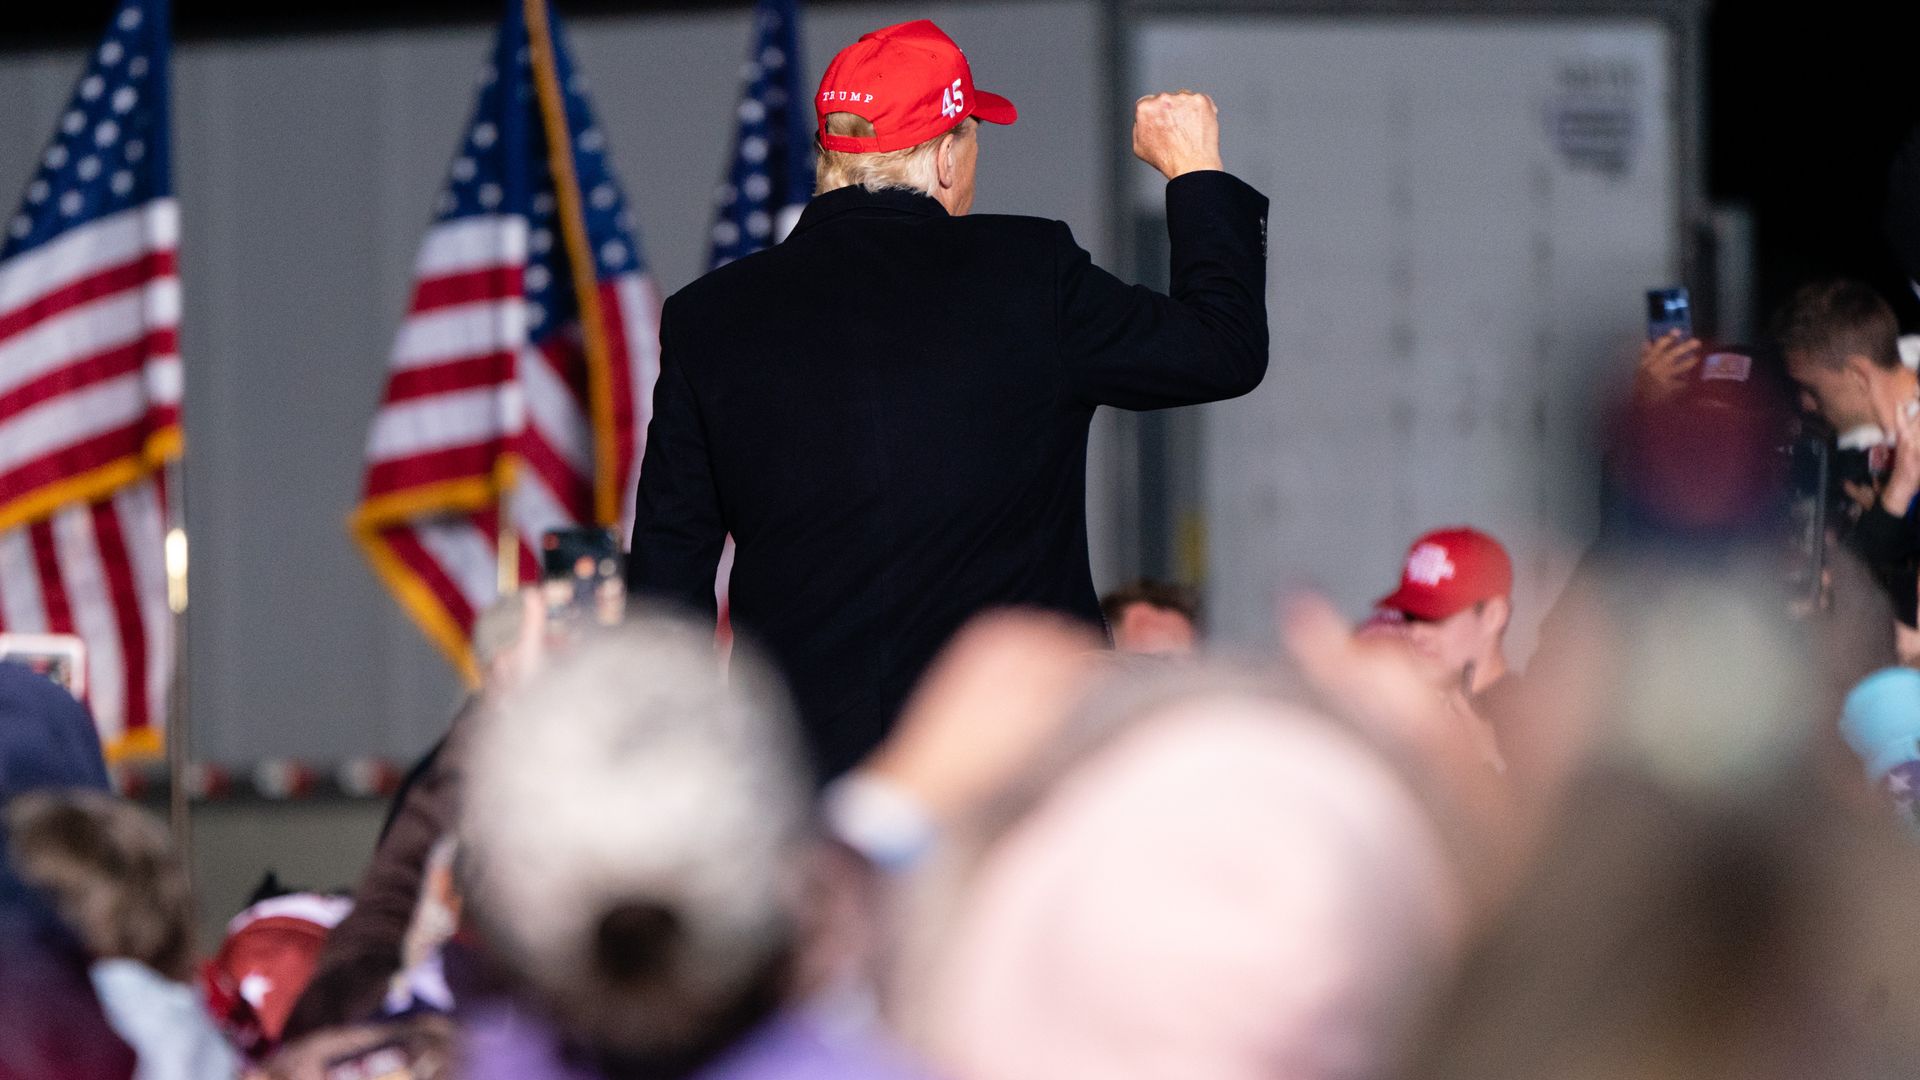 Former President Trump is seen pumping his first after a rally in Georgia on Saturday.